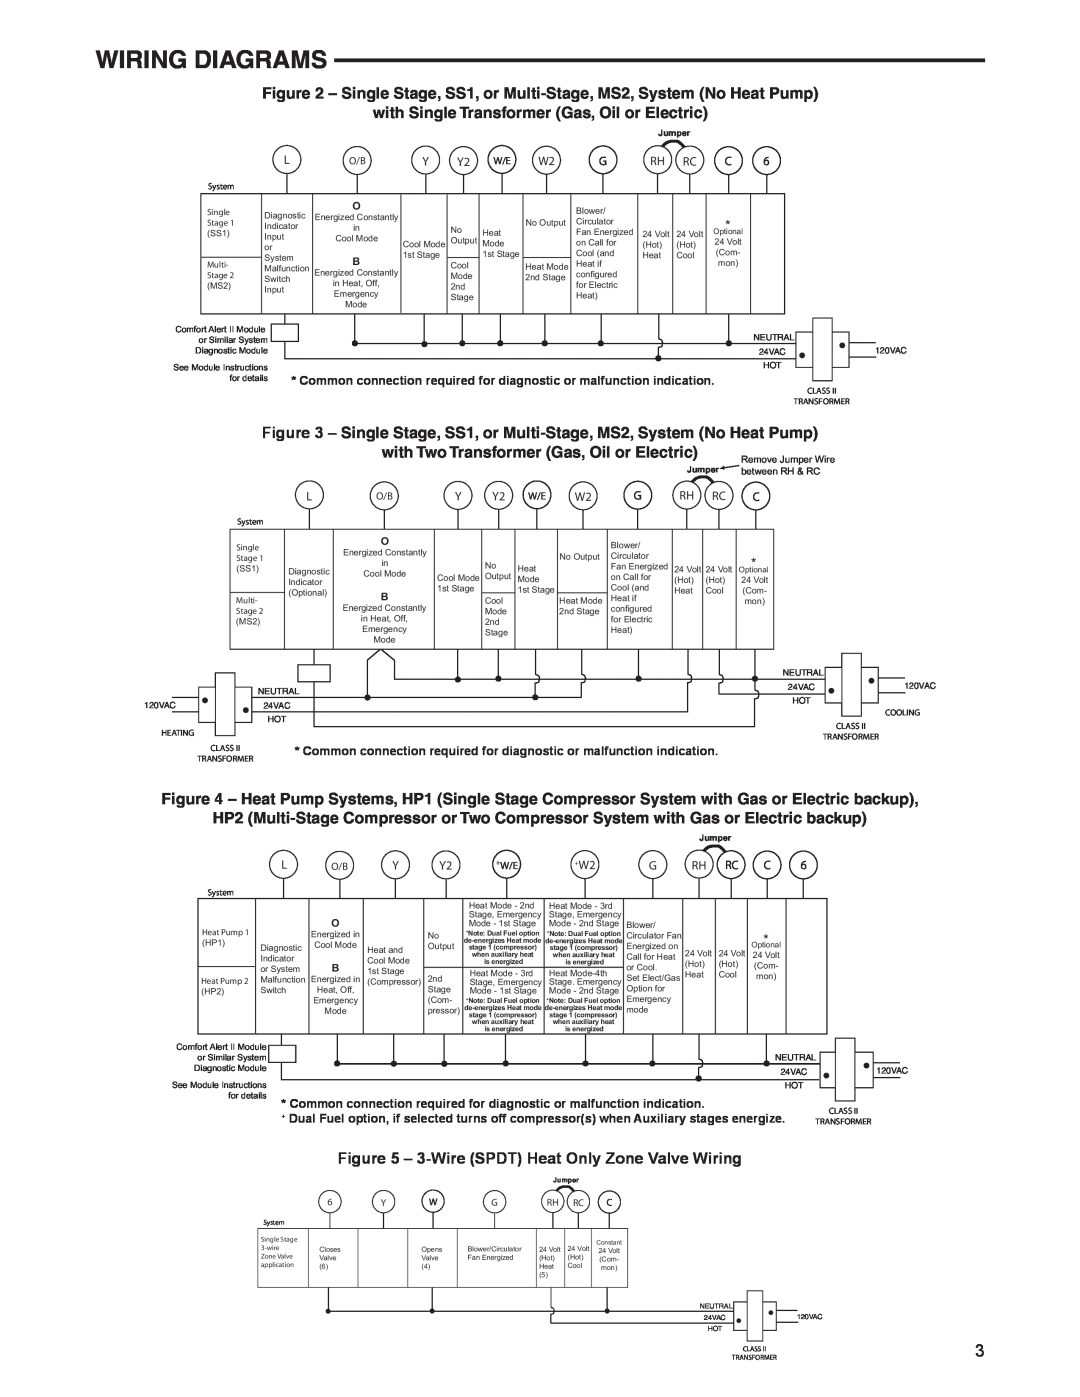 White Rodgers 1F95EZ-0671 specifications Wiring Diagrams, 3-WireSPDT Heat Only Zone Valve Wiring 